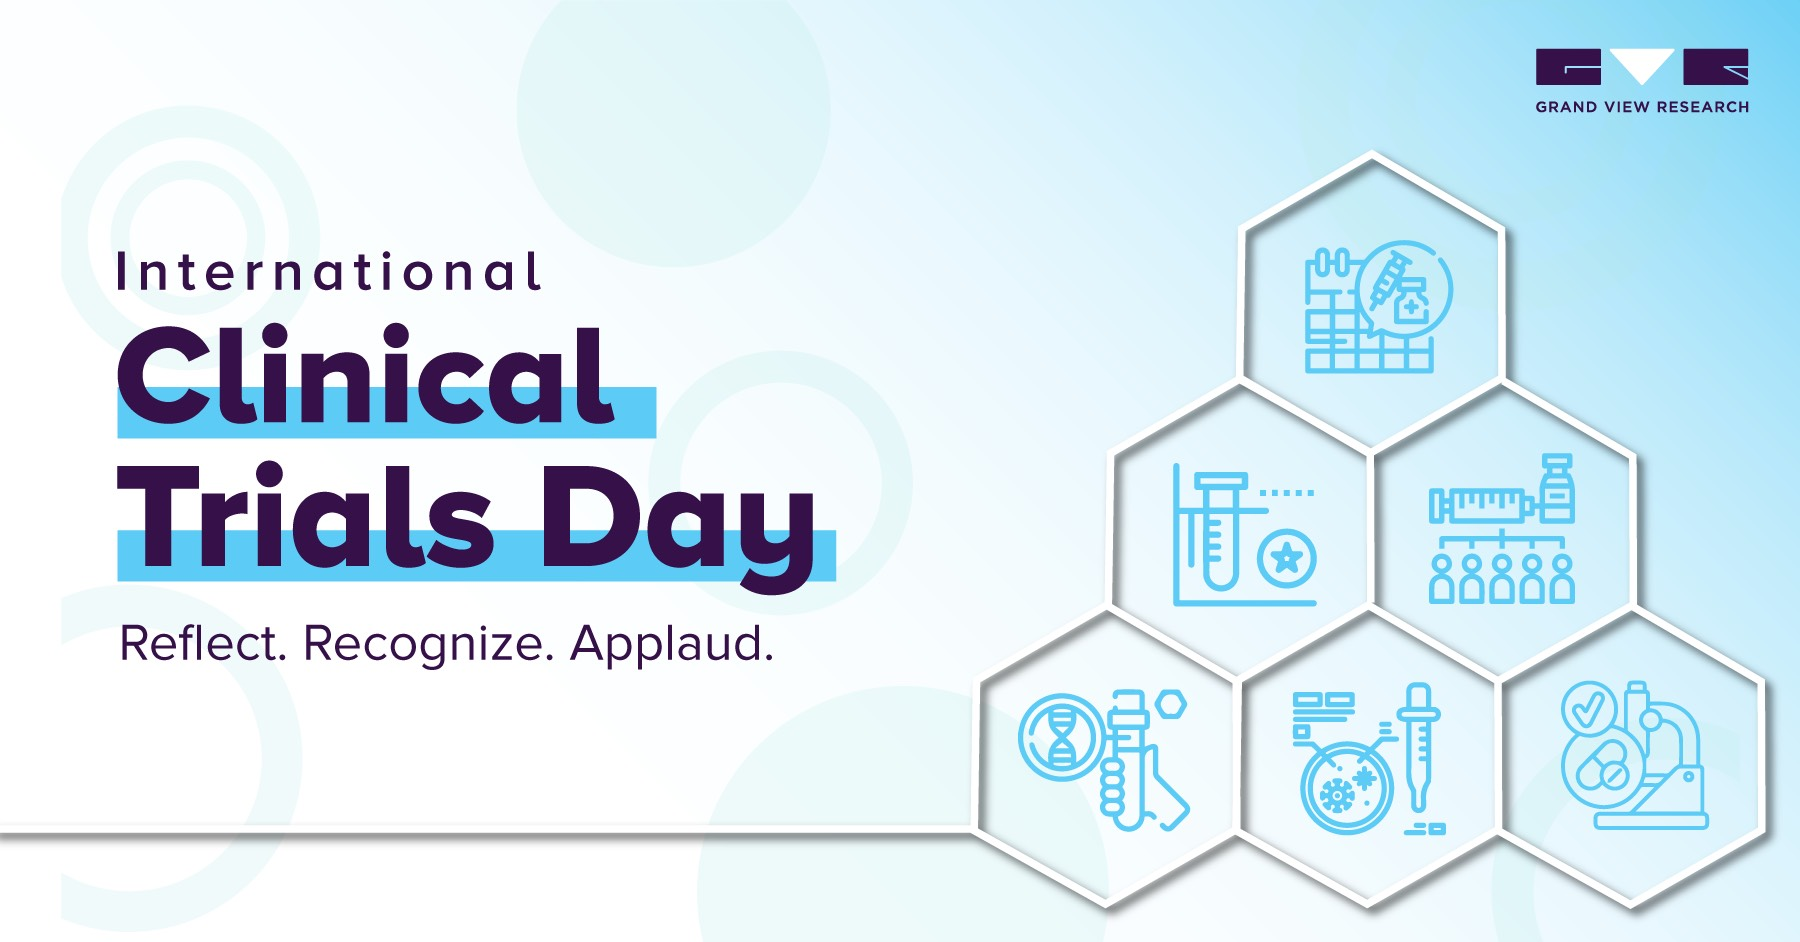 International Clinical Trials Day on May 20: Reflect. Recognize. Applaud